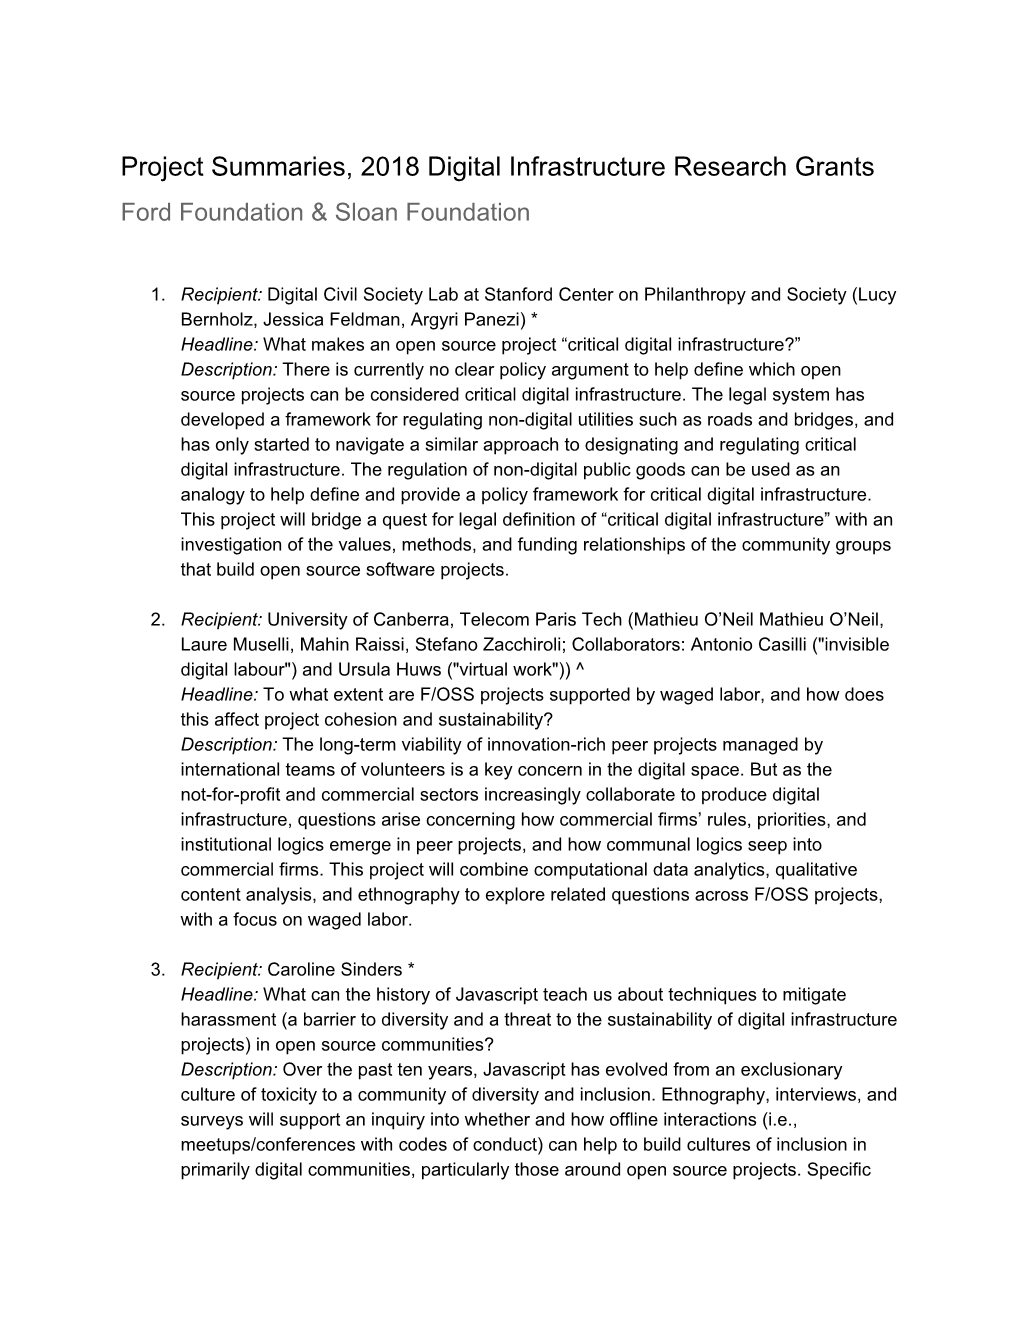 Project Summaries, 2018 Digital Infrastructure Research Grants Ford Foundation & Sloan Foundation